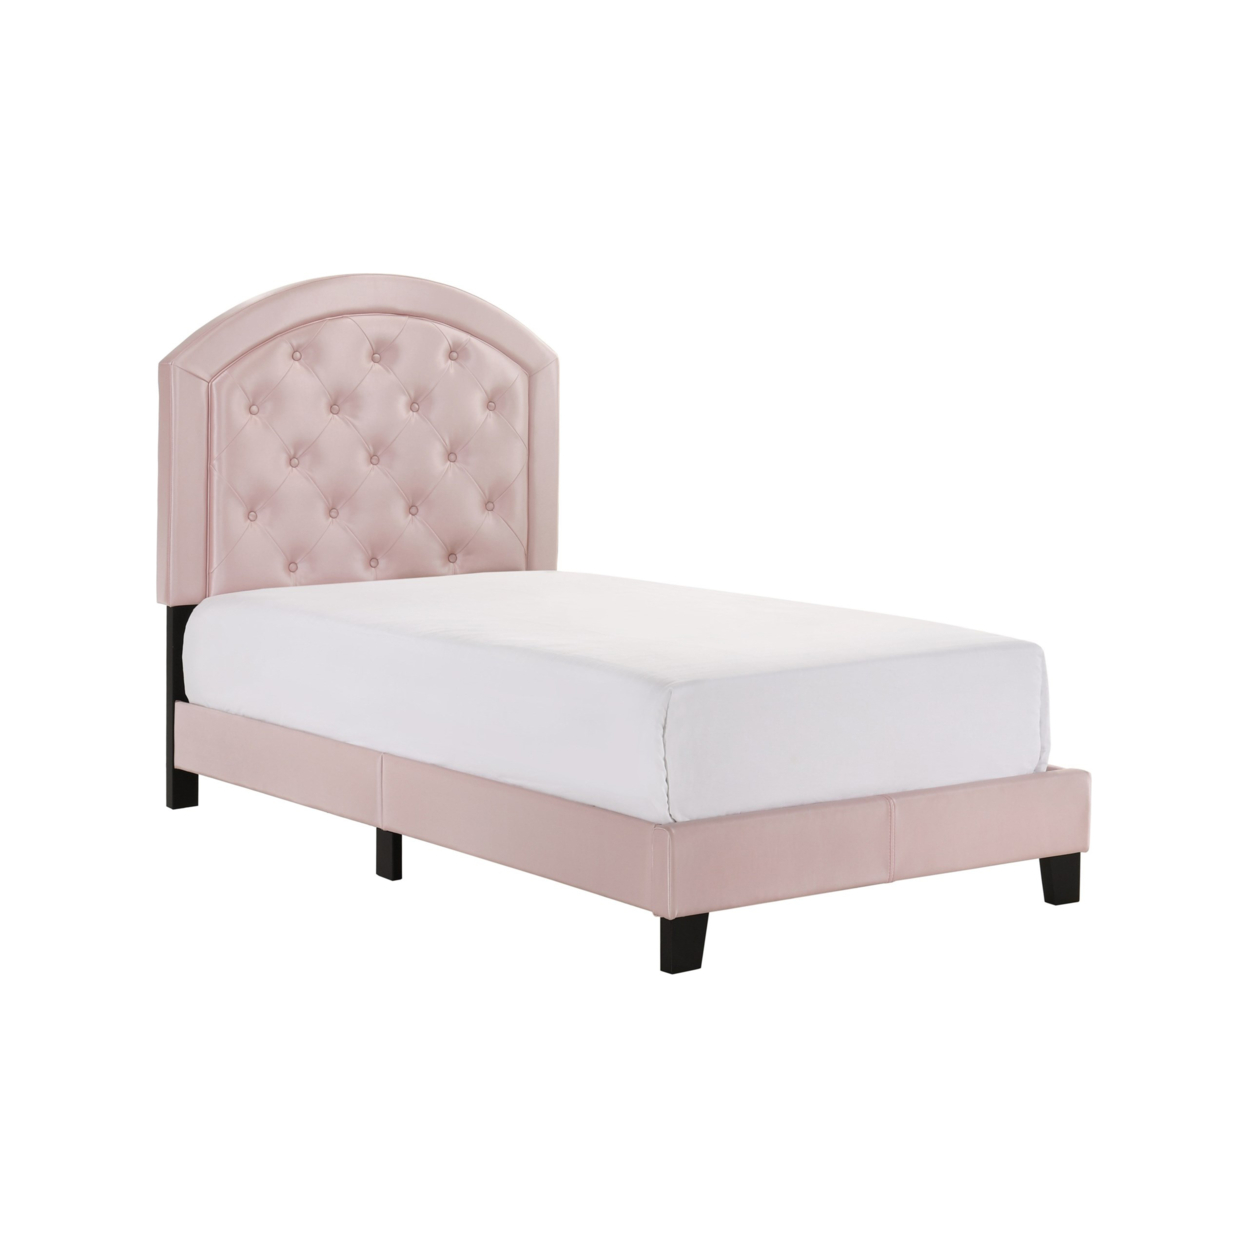 Twin Platform Bed With Curved Button Tufted Headboard, Pink- Saltoro Sherpi